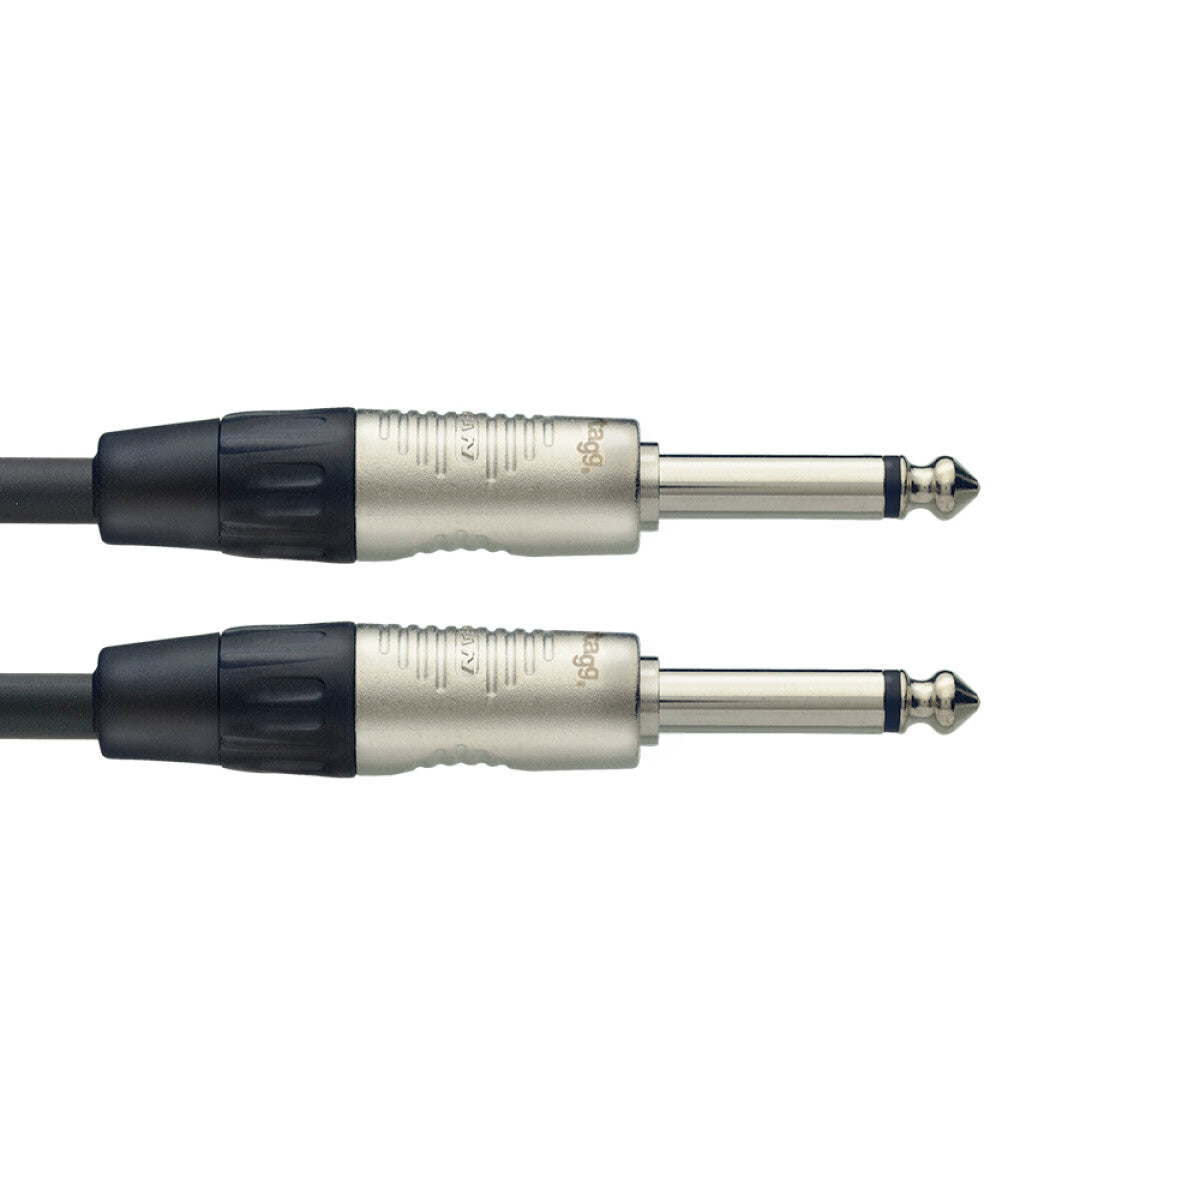 Stagg Professional Instrument Cable 3M